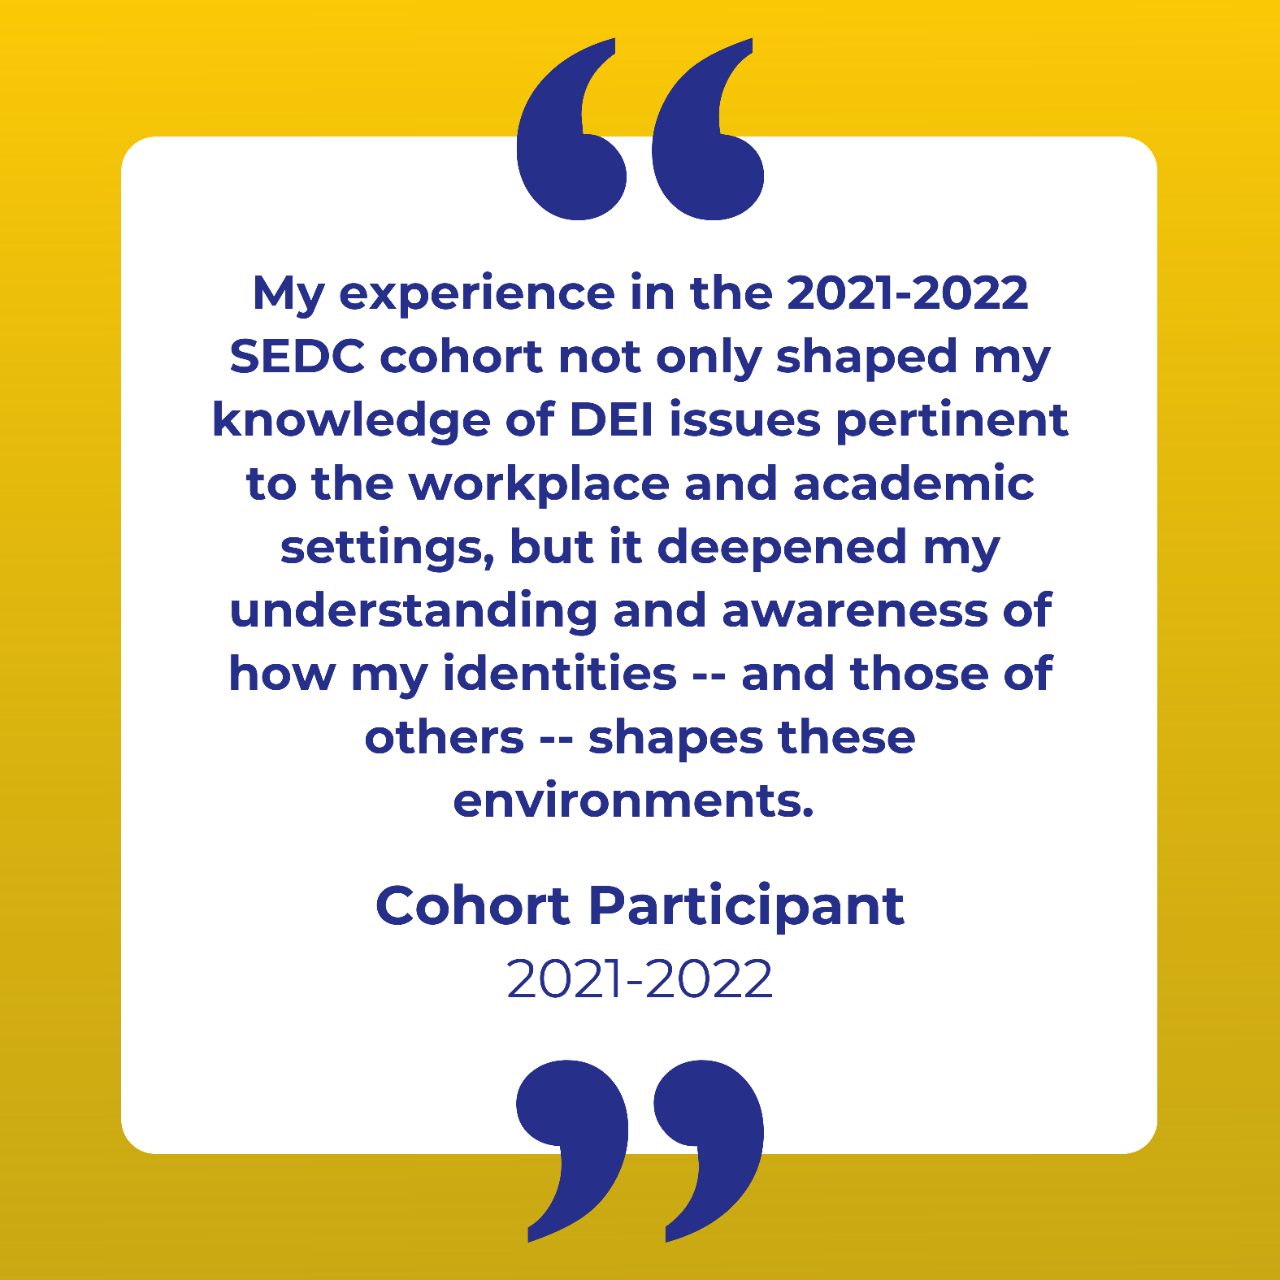 Testimonial: My experience in the 2021-2022 SEDC cohort not only shaped my knowledge of DEI issues pertinent to the workplace and academic settings, but it deepened my understanding and awareness of how my identities -- and those of others -- shapes these environments. 